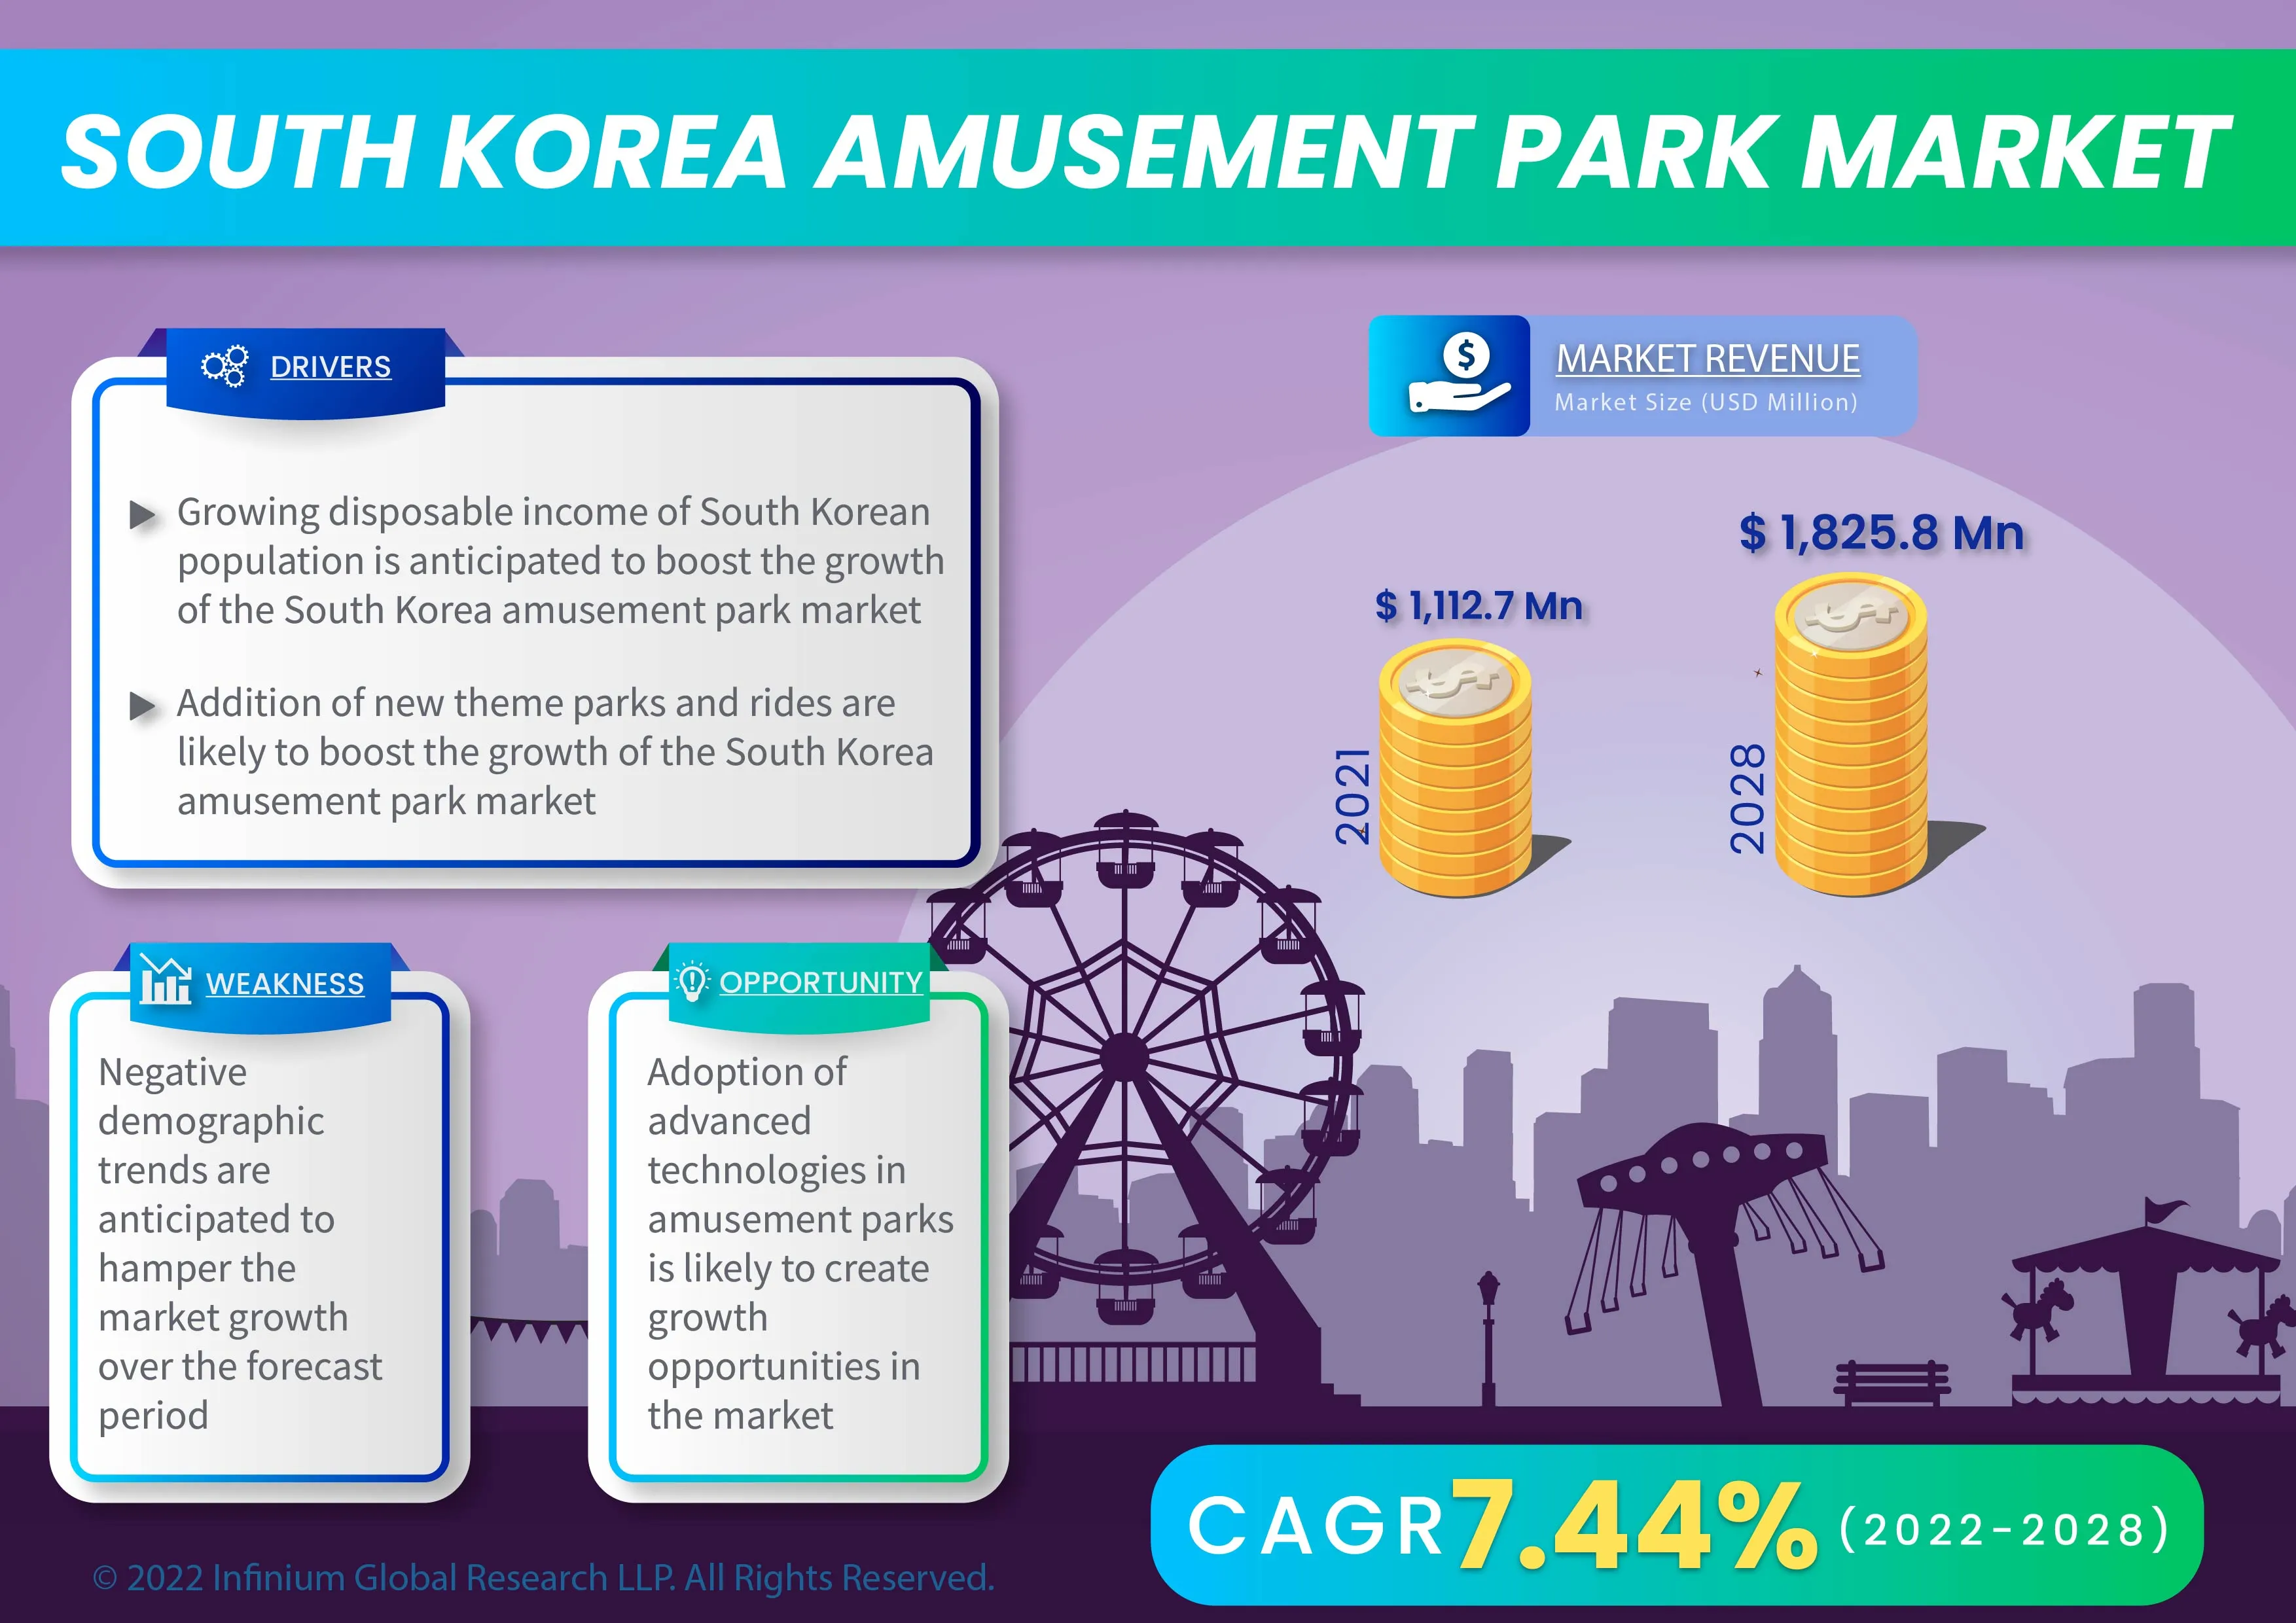 South Korea Amusement Park Market Was Valued at USD 1,112.7 Million in 2021 and is Expected to Reach USD 1,825.8 Million by 2028 and Grow at a CAGR of 7.44% Over the Forecast Period 2022-2028.